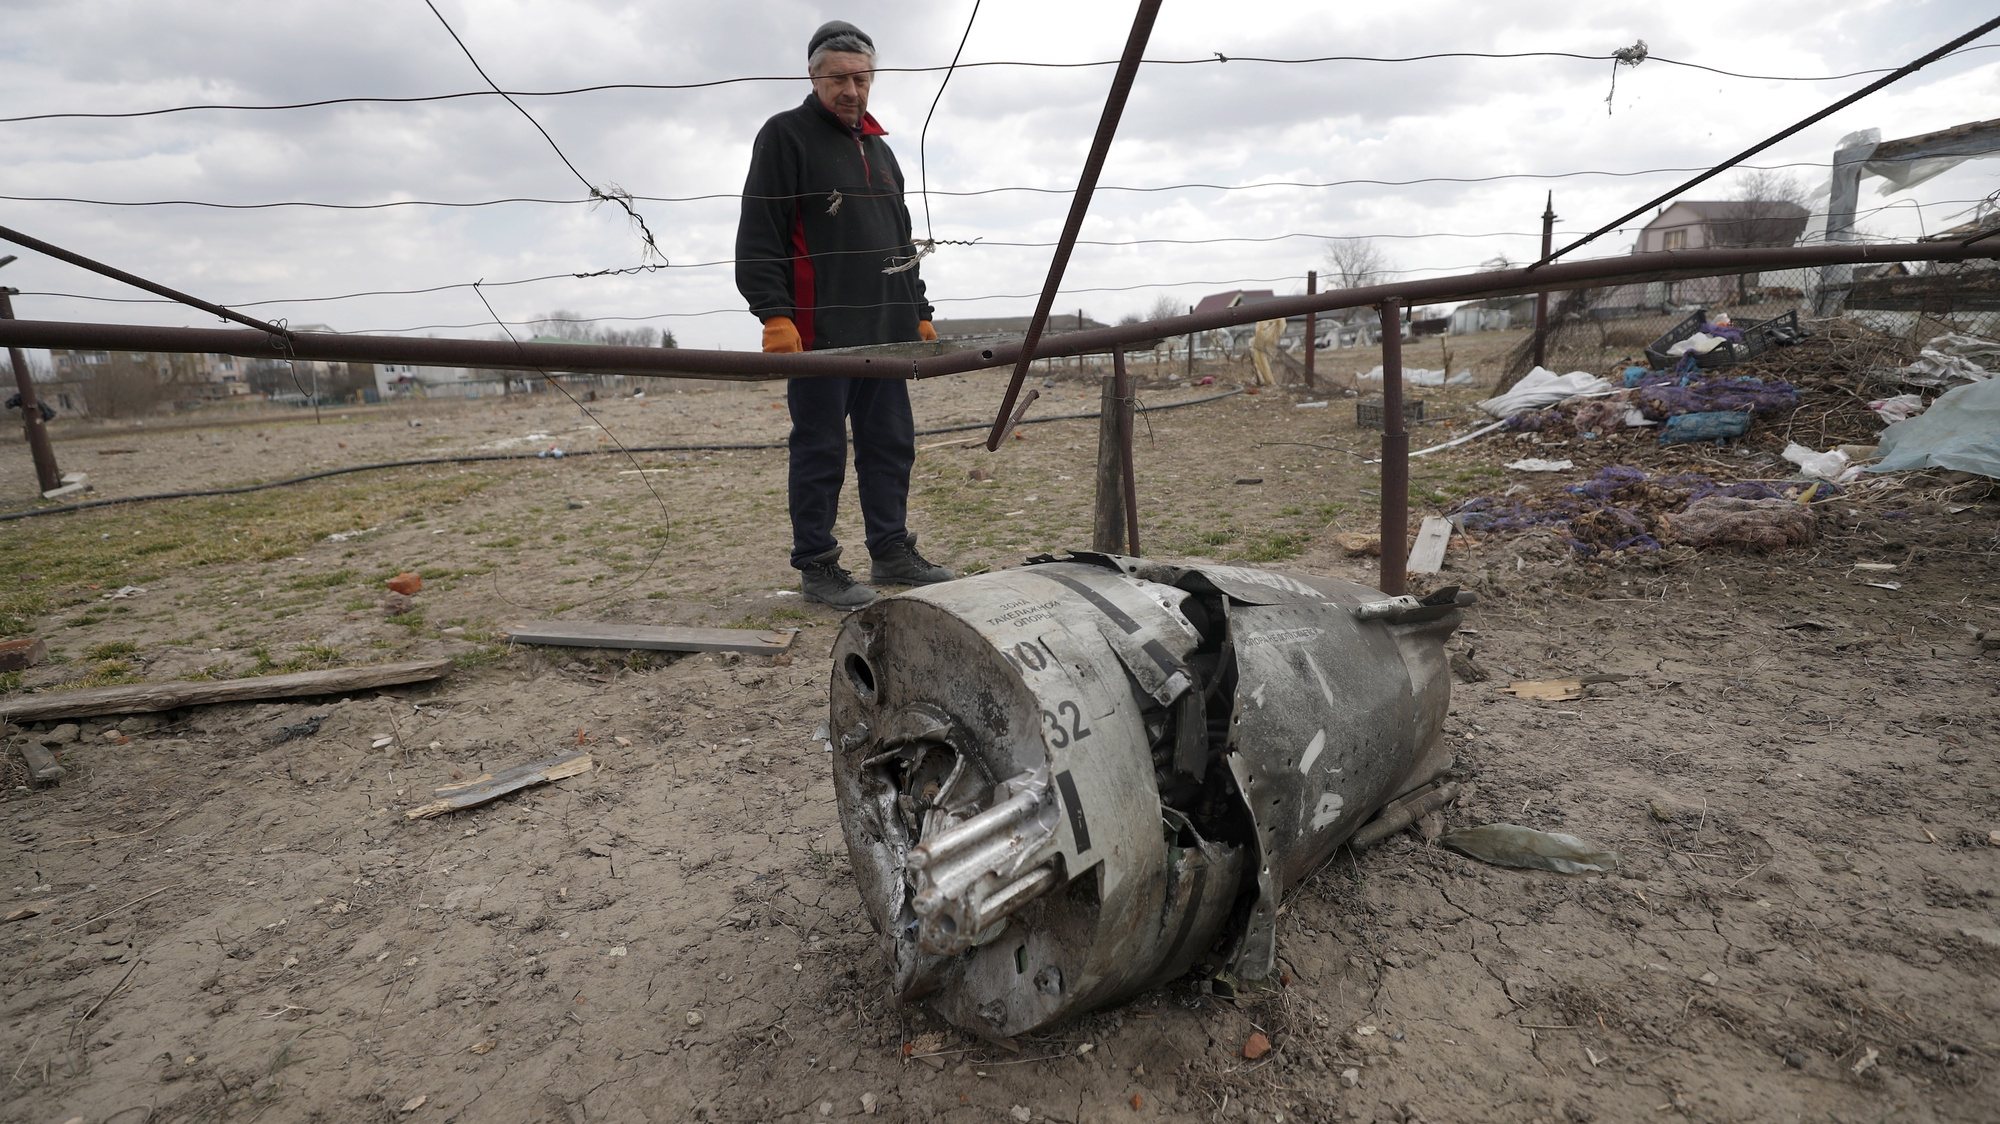 epa09857824 Ditchinku Nikulayf, 64, inspects the wreckage of a missile&#039;s engine in the aftermath of a Russian airstrike in the village of Ulica Szkolna, Kyiv Oblast, 29 March 2022. Russian troops entered Ukraine on 24 February resulting in fighting and destruction in the country, and triggering a series of severe economic sanctions on Russia.  EPA/ATEF SAFADI